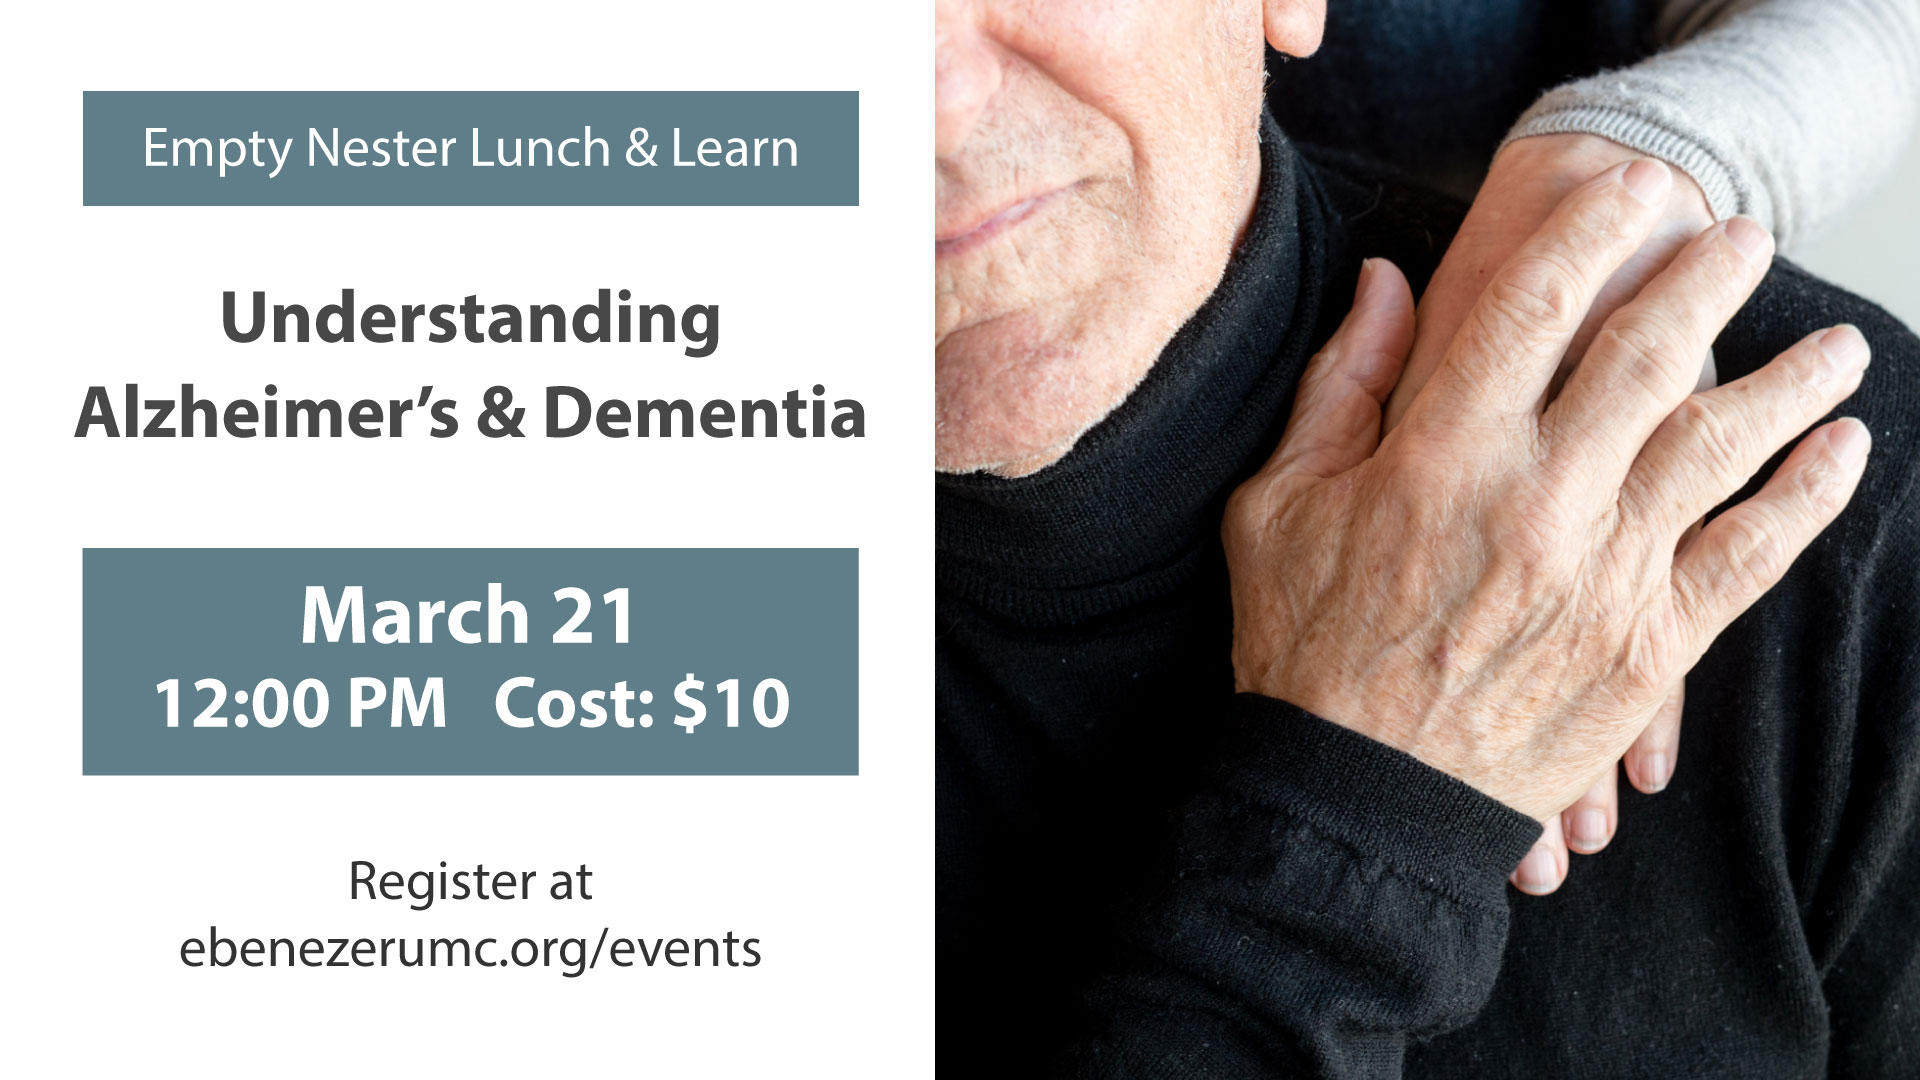 <h1 class="tribe-events-single-event-title">Lunch and Learn: Understanding Alzheimer’s & Dementia</h1>